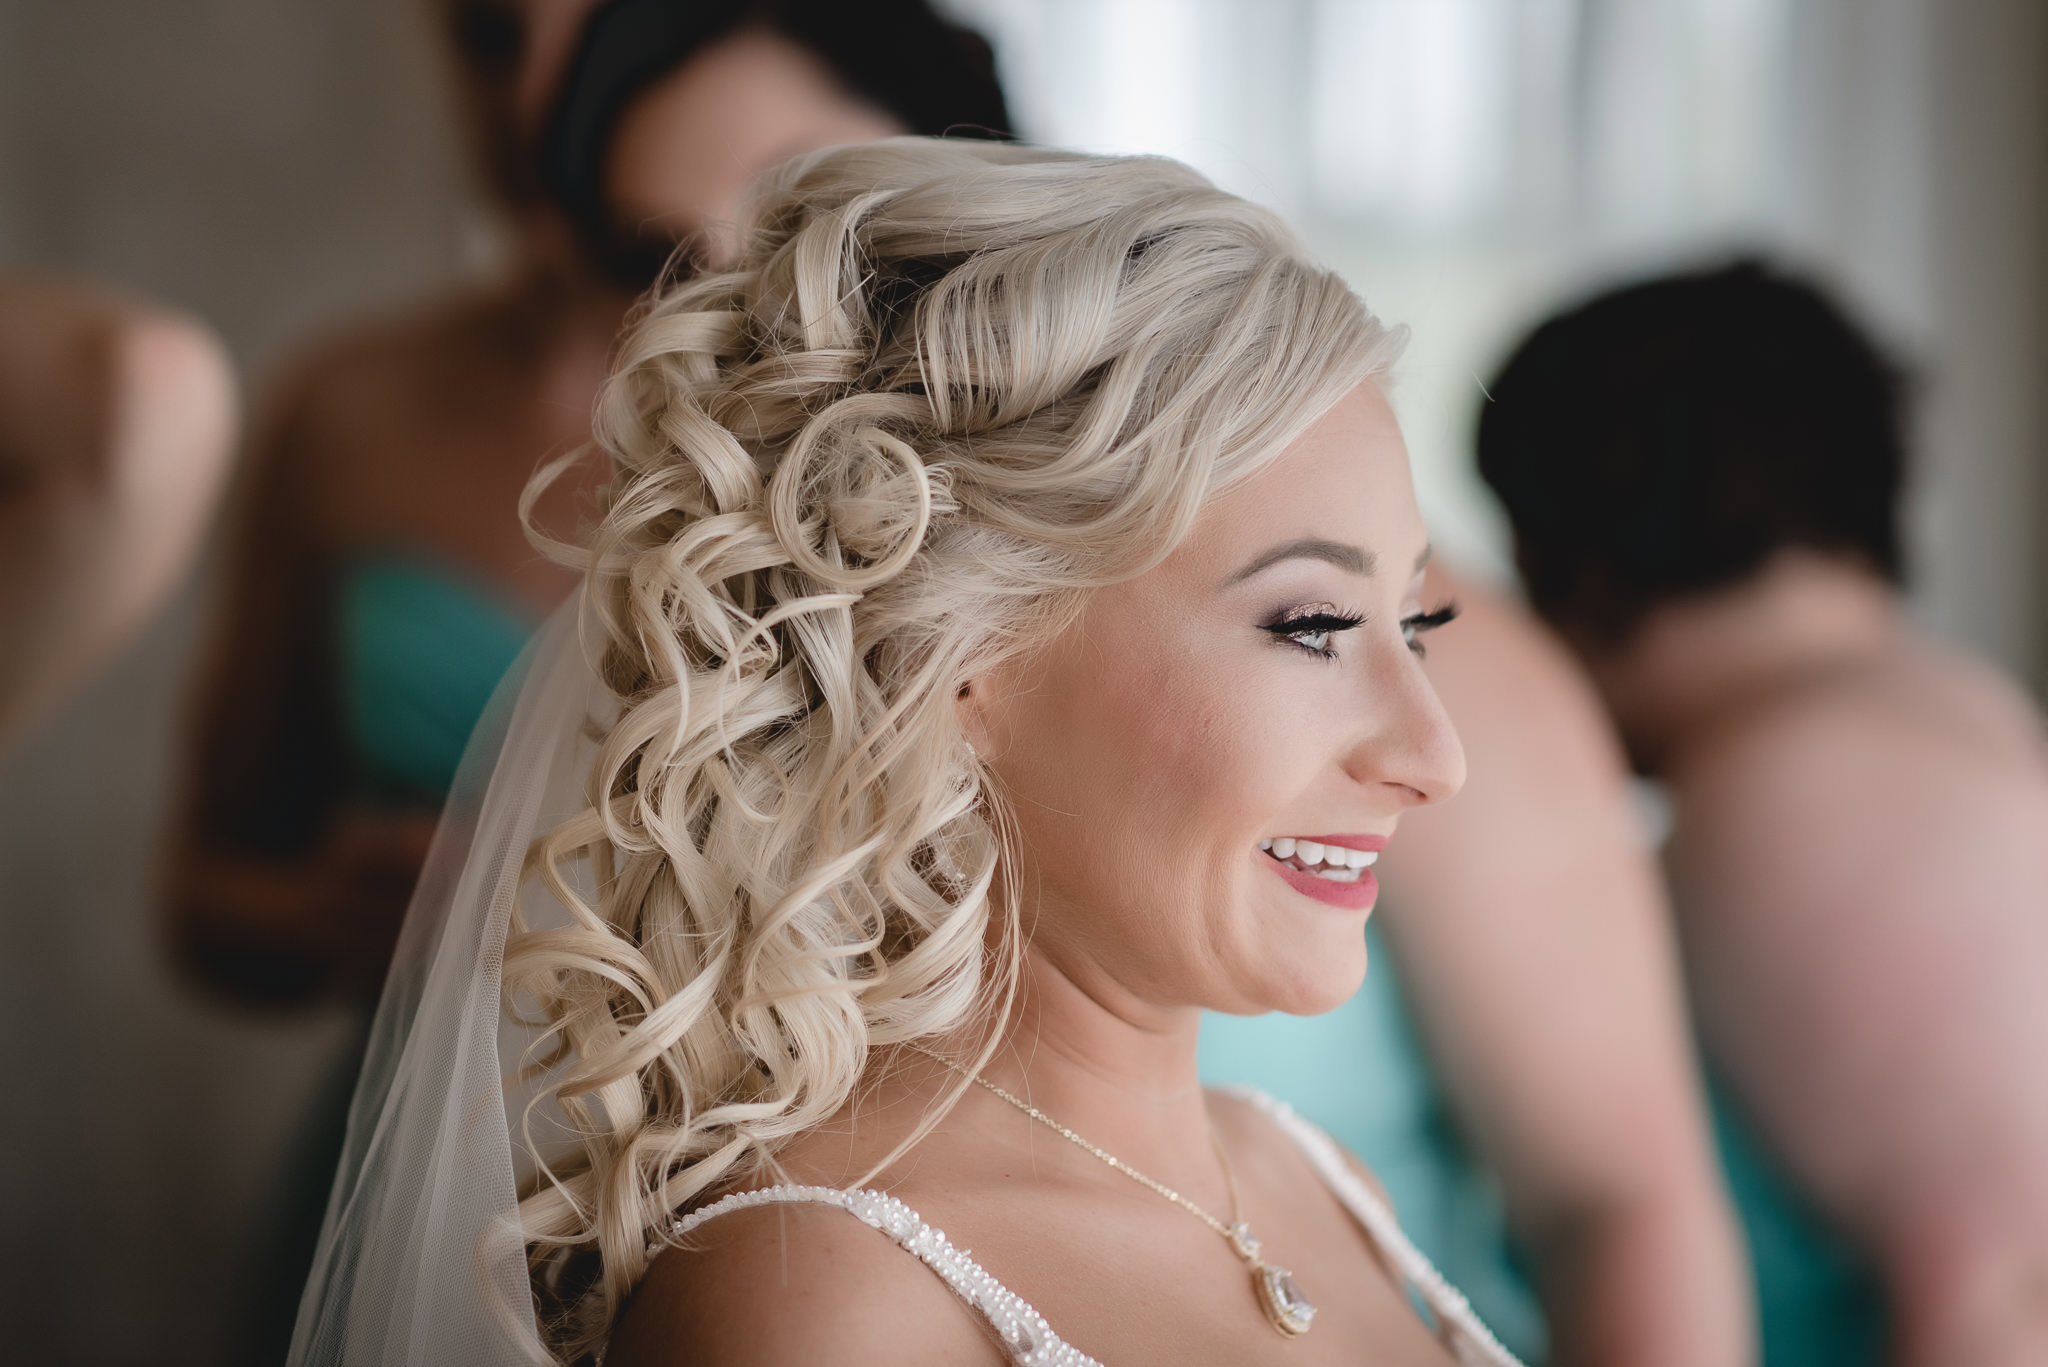 Side profile of bride's face while her bridesmaids help her get dressed